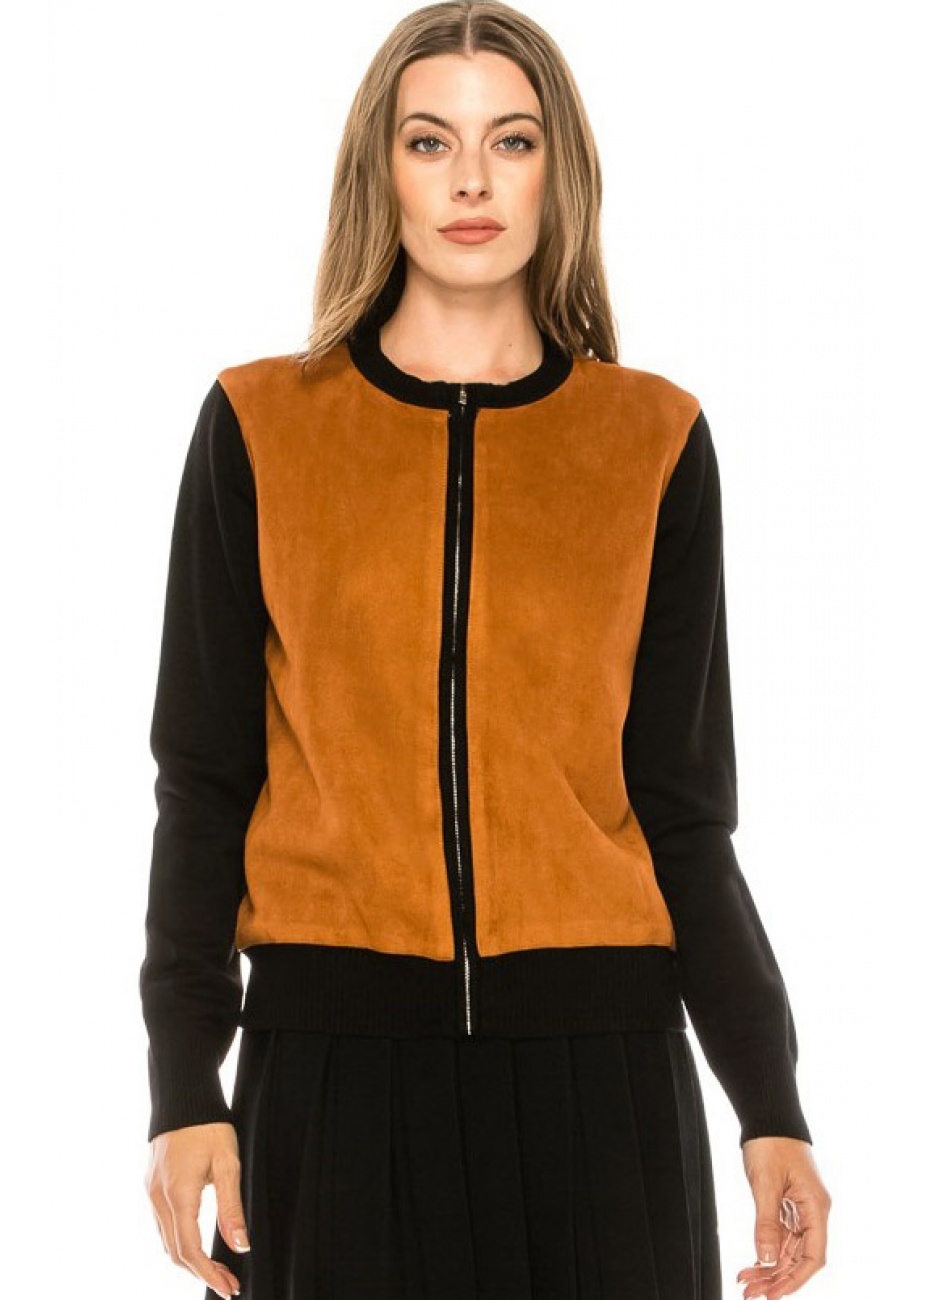 Two-colored zip-through cardigan in rust